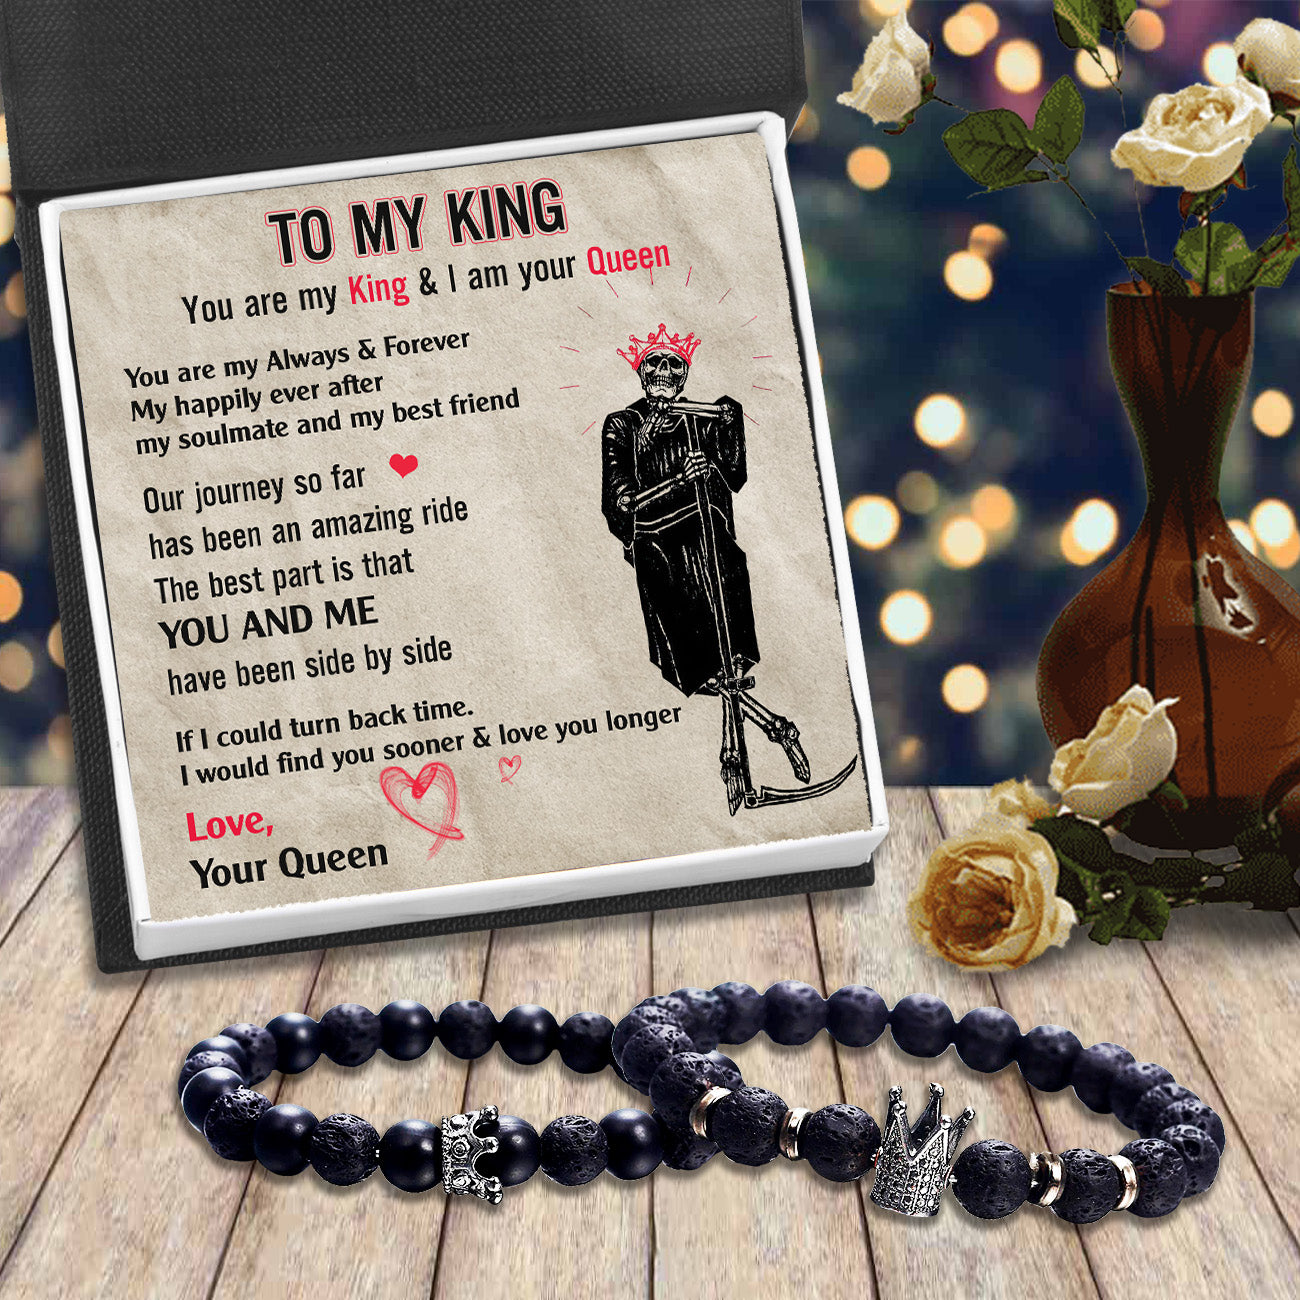 King & Queen Couple Bracelets - Skull - To My Man - Love, Your Queen - Ukgbae26011